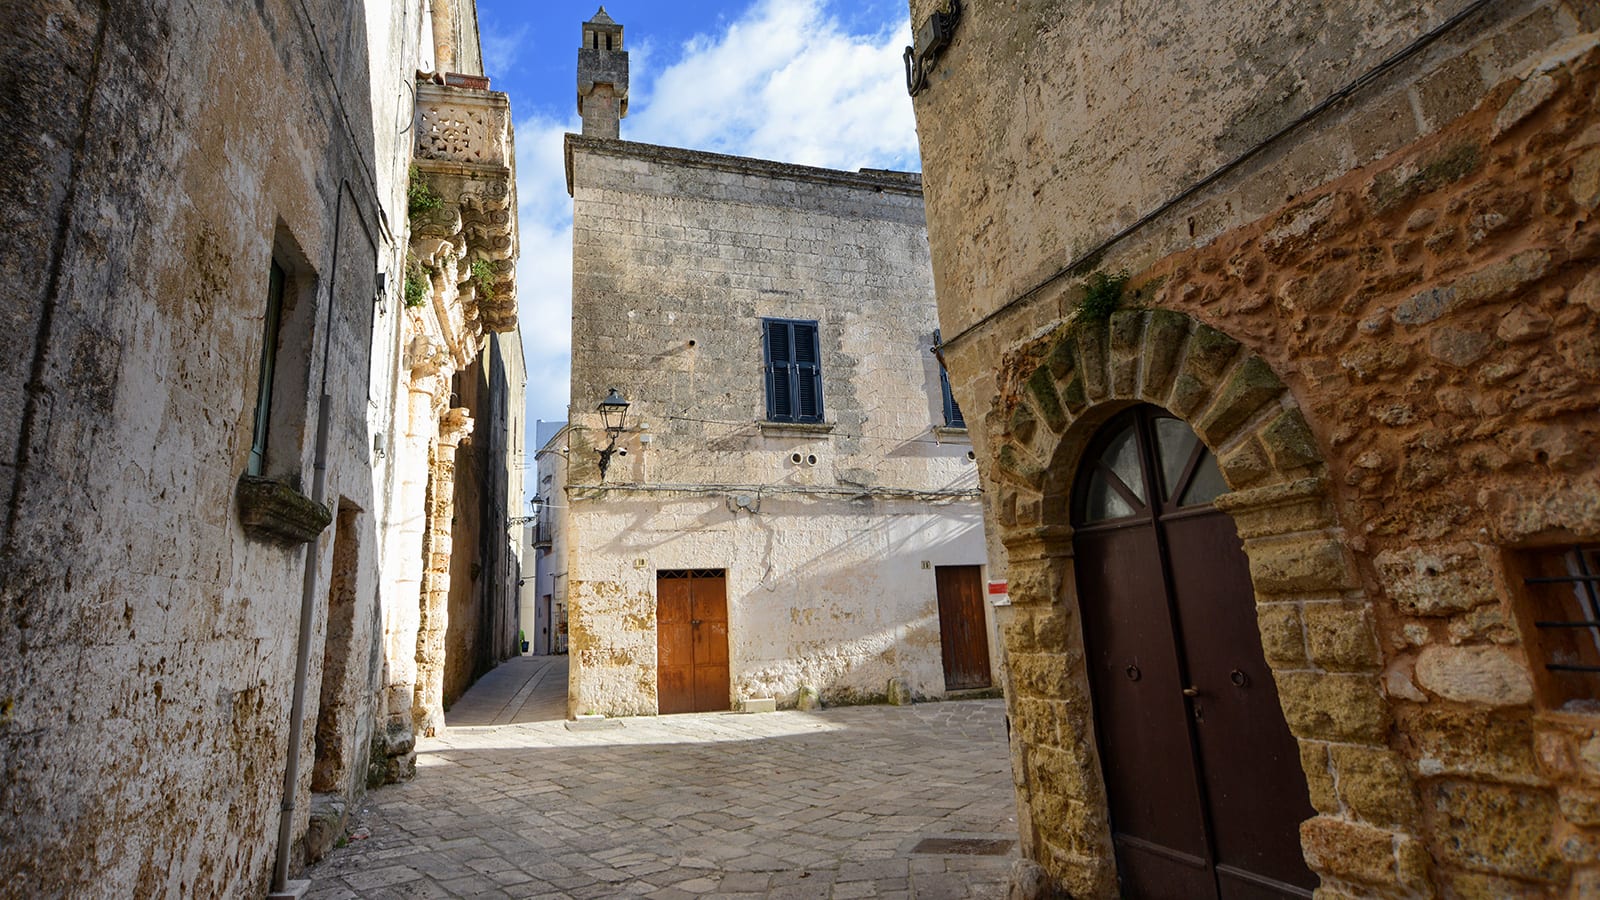 A picturesque Italian town that will pay you $30,000 to move there